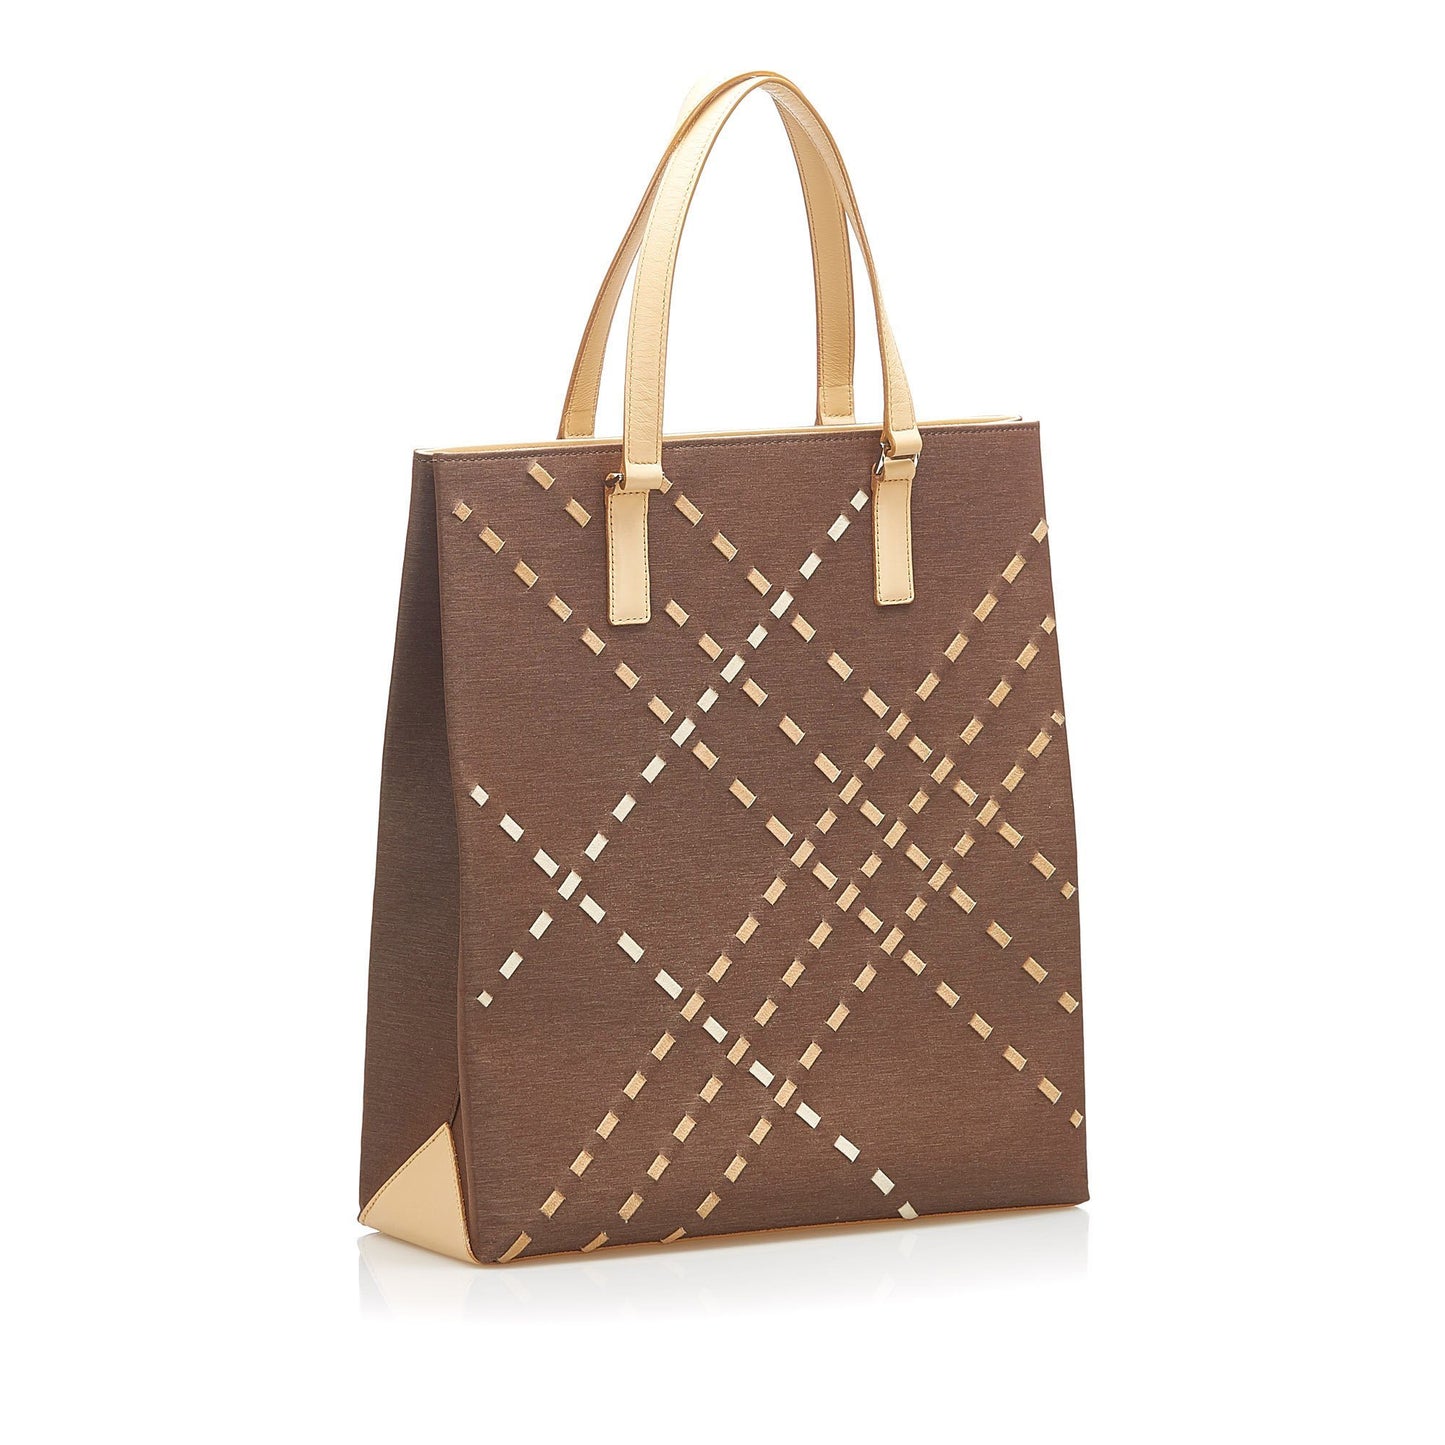 Burberry Woven Leather Tote Bag Bags Burberry 